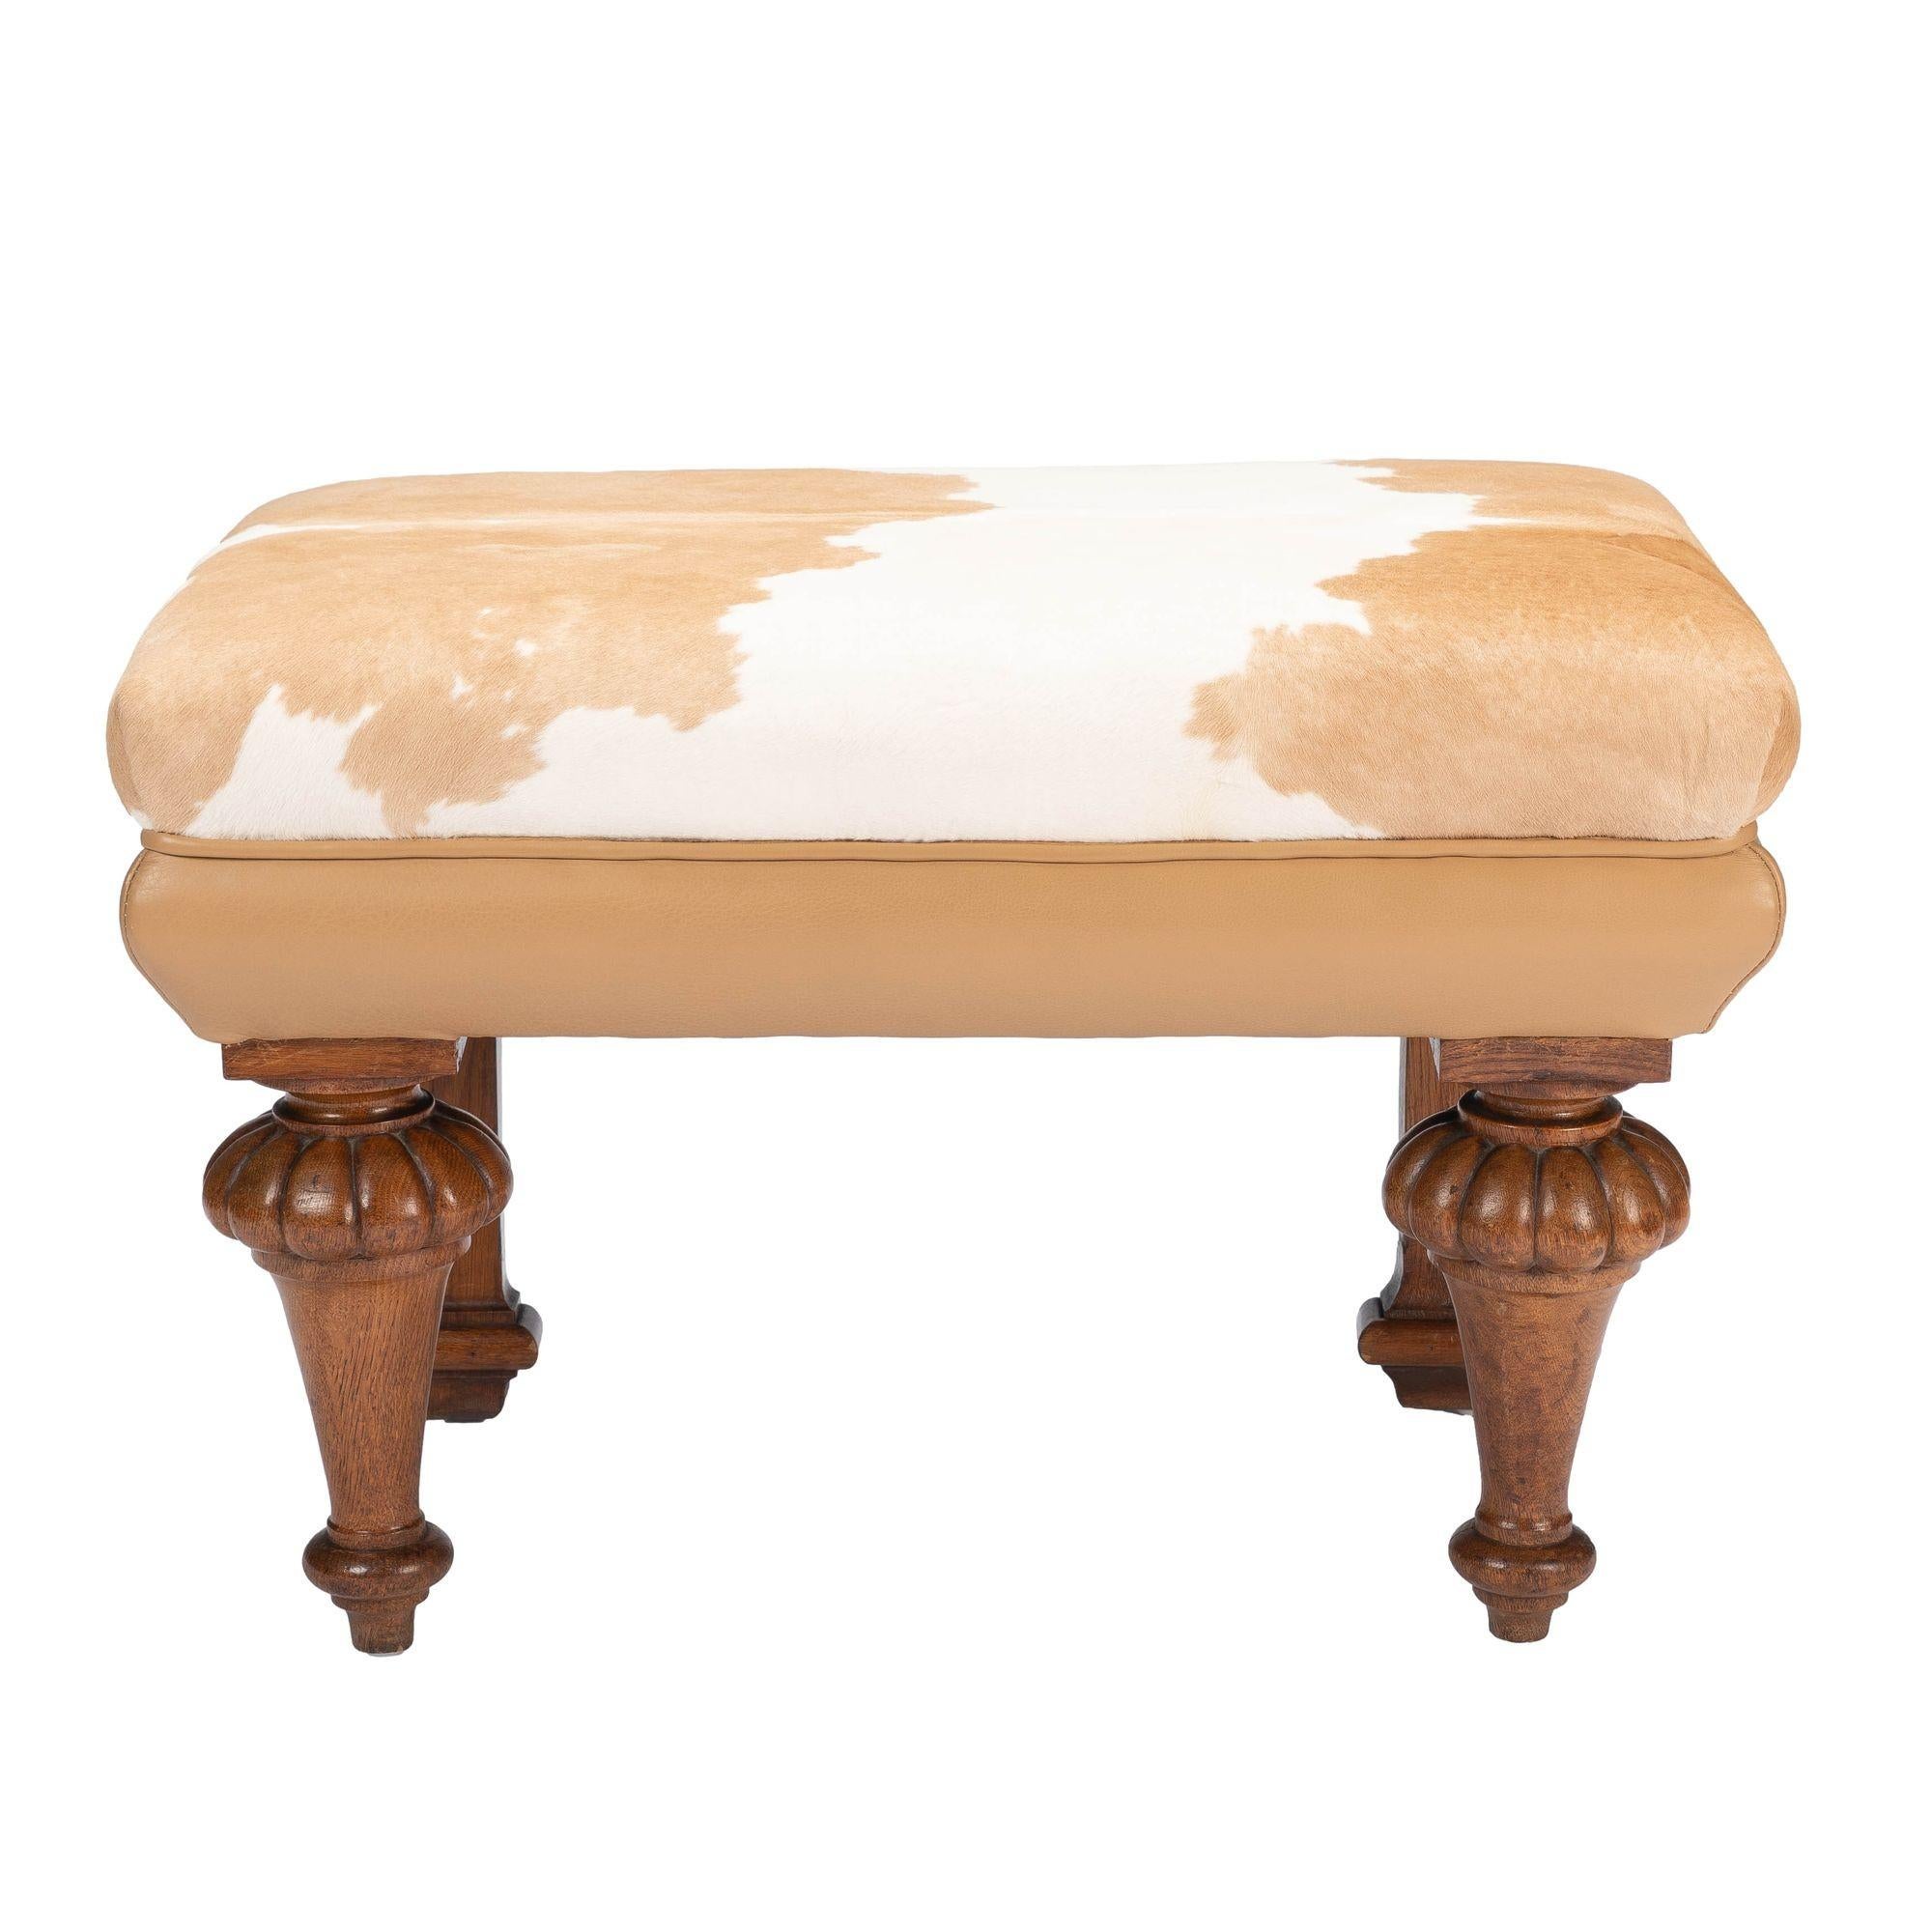 English William IV leather & hair on hide calf skin upholstered window bench on English oak legs. The bench features conical turned and melon carved front legs with Neoclassic pilaster rear legs supporting an upholstered seat frame covered in